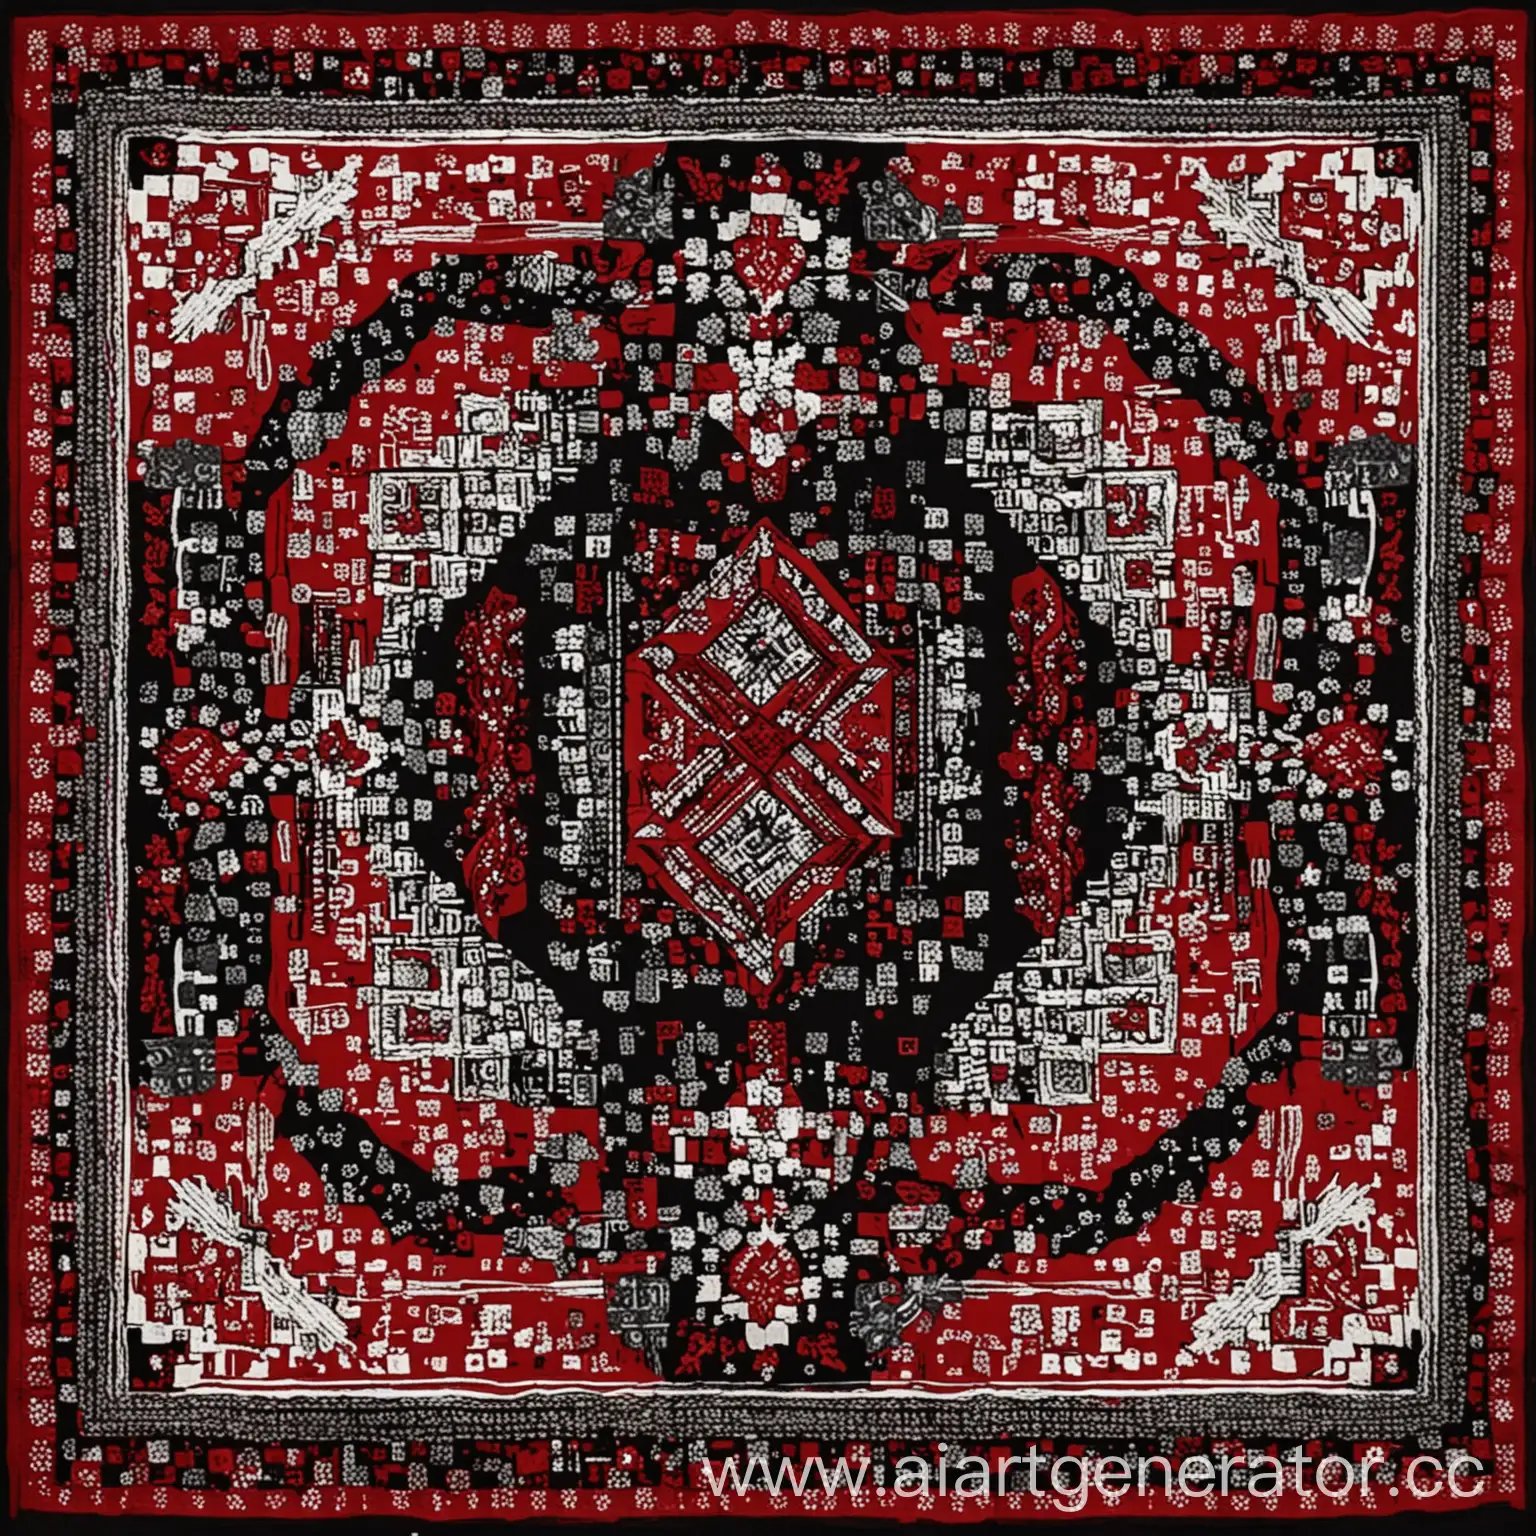 Slavic-Style-Square-Scarf-with-Cubic-Patterns-in-Black-White-and-Red-Colors